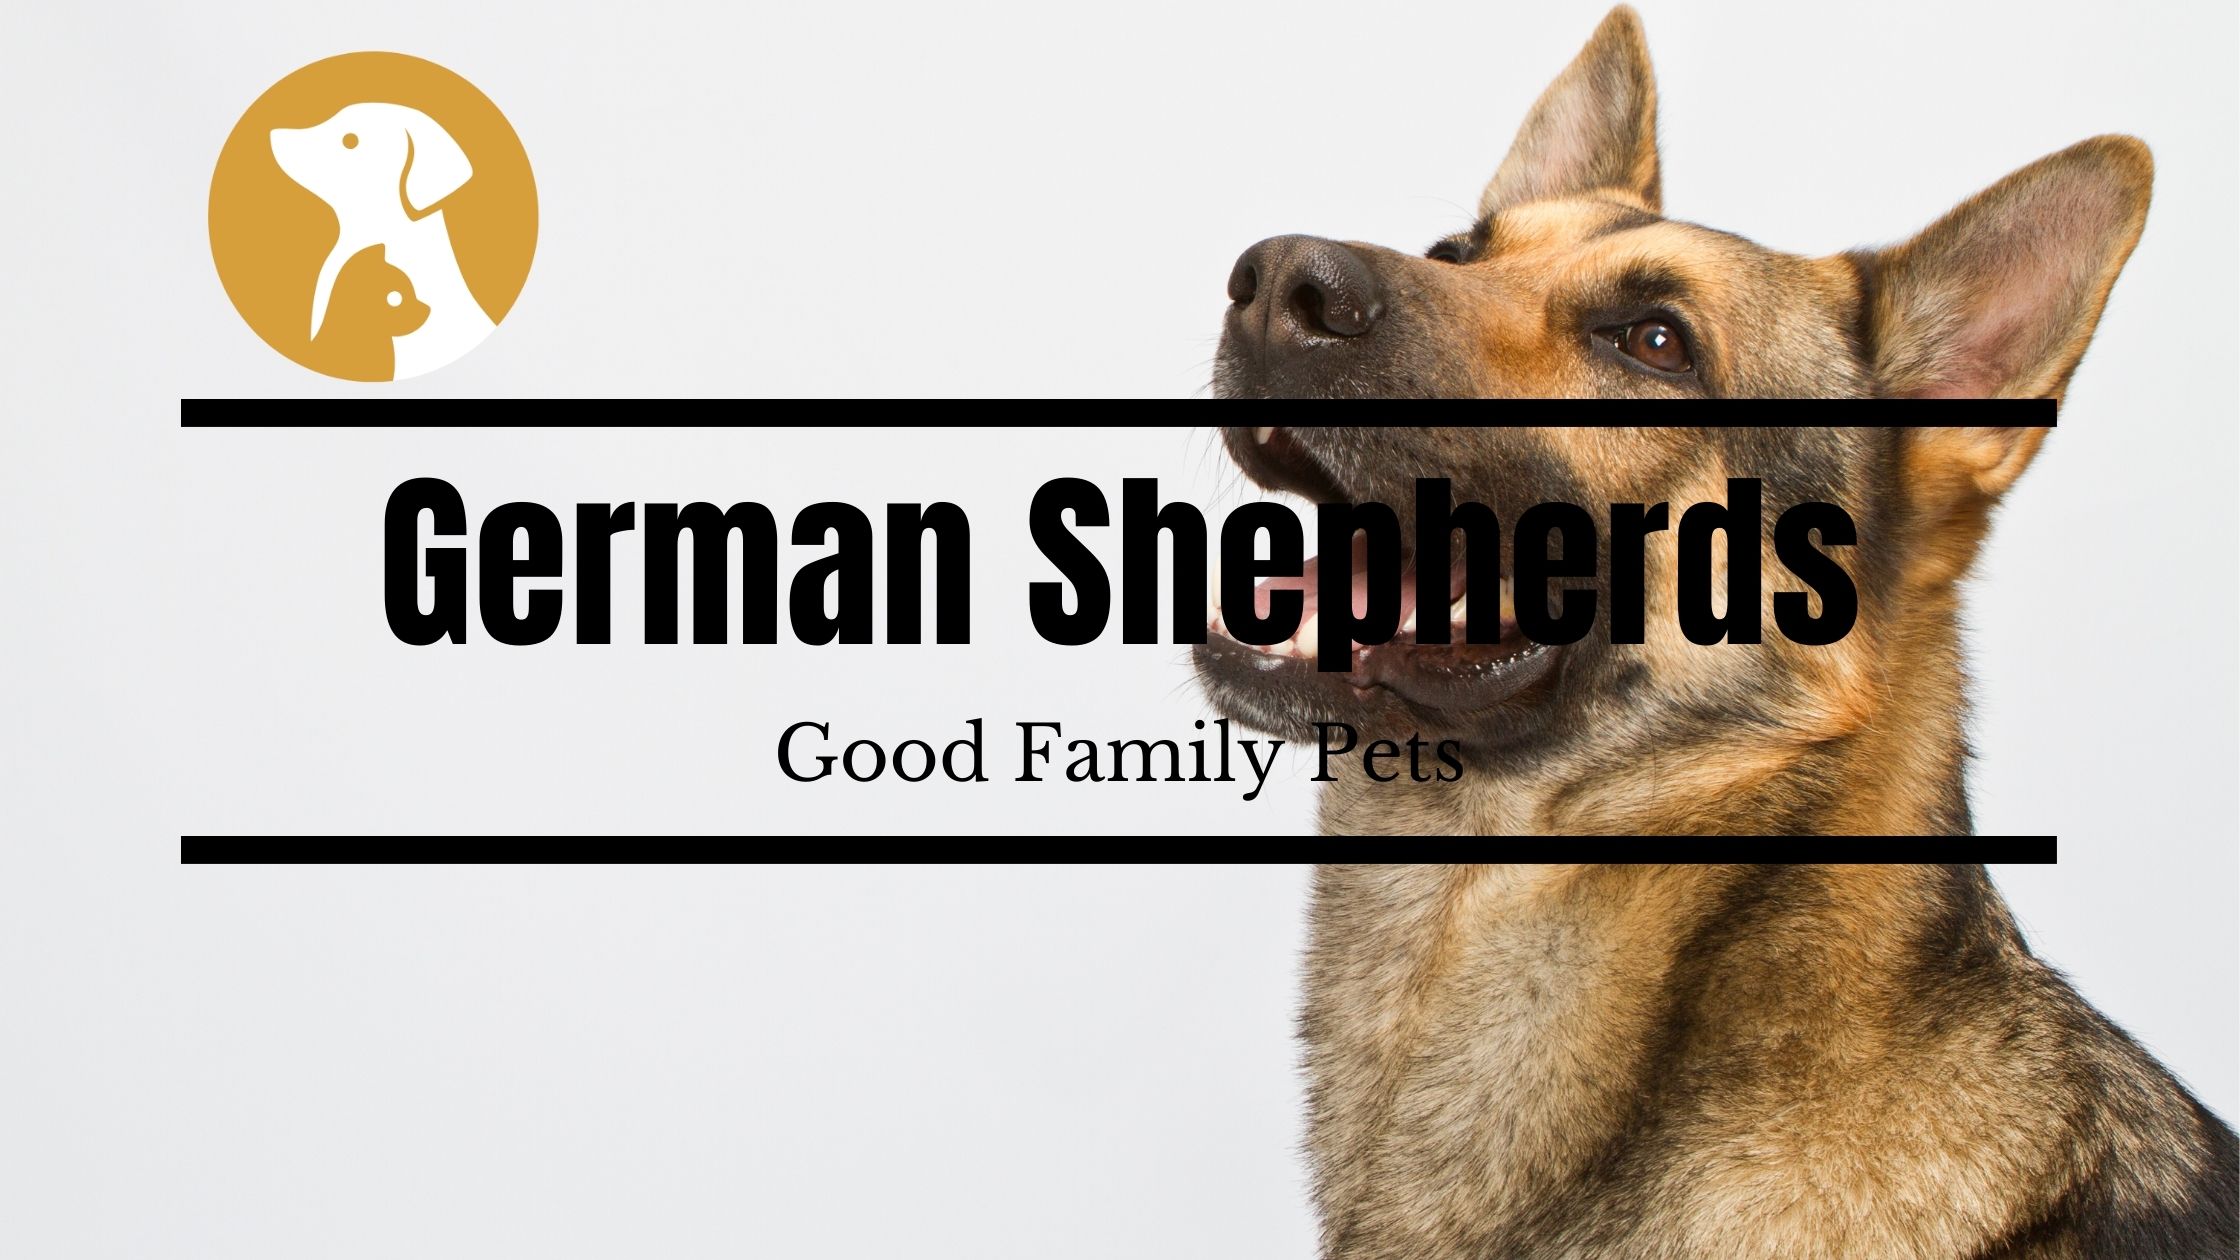 Are German Shepherds Good Family Pets